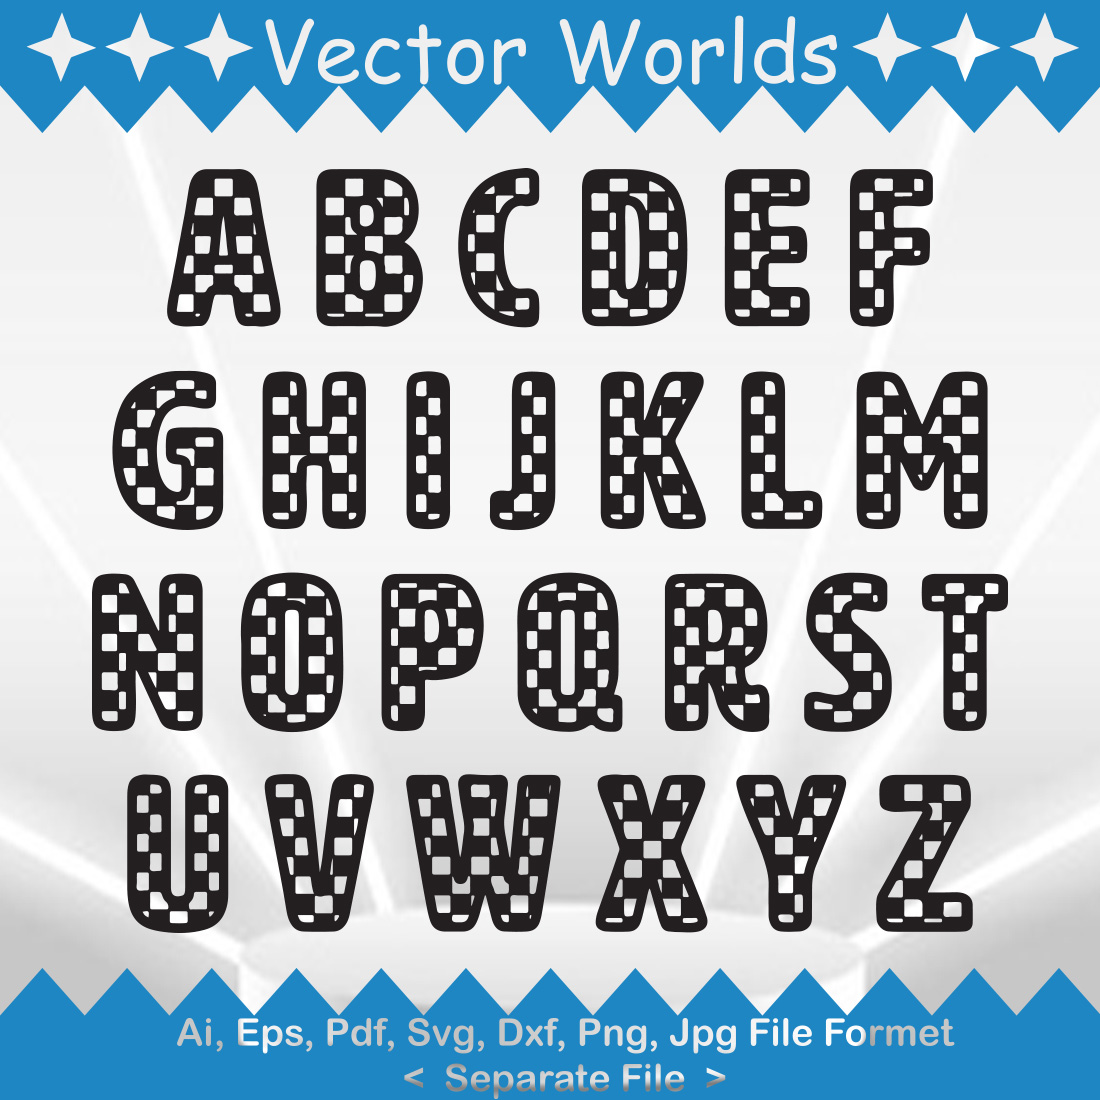 Checkered Letters SVG Vector Design cover image.